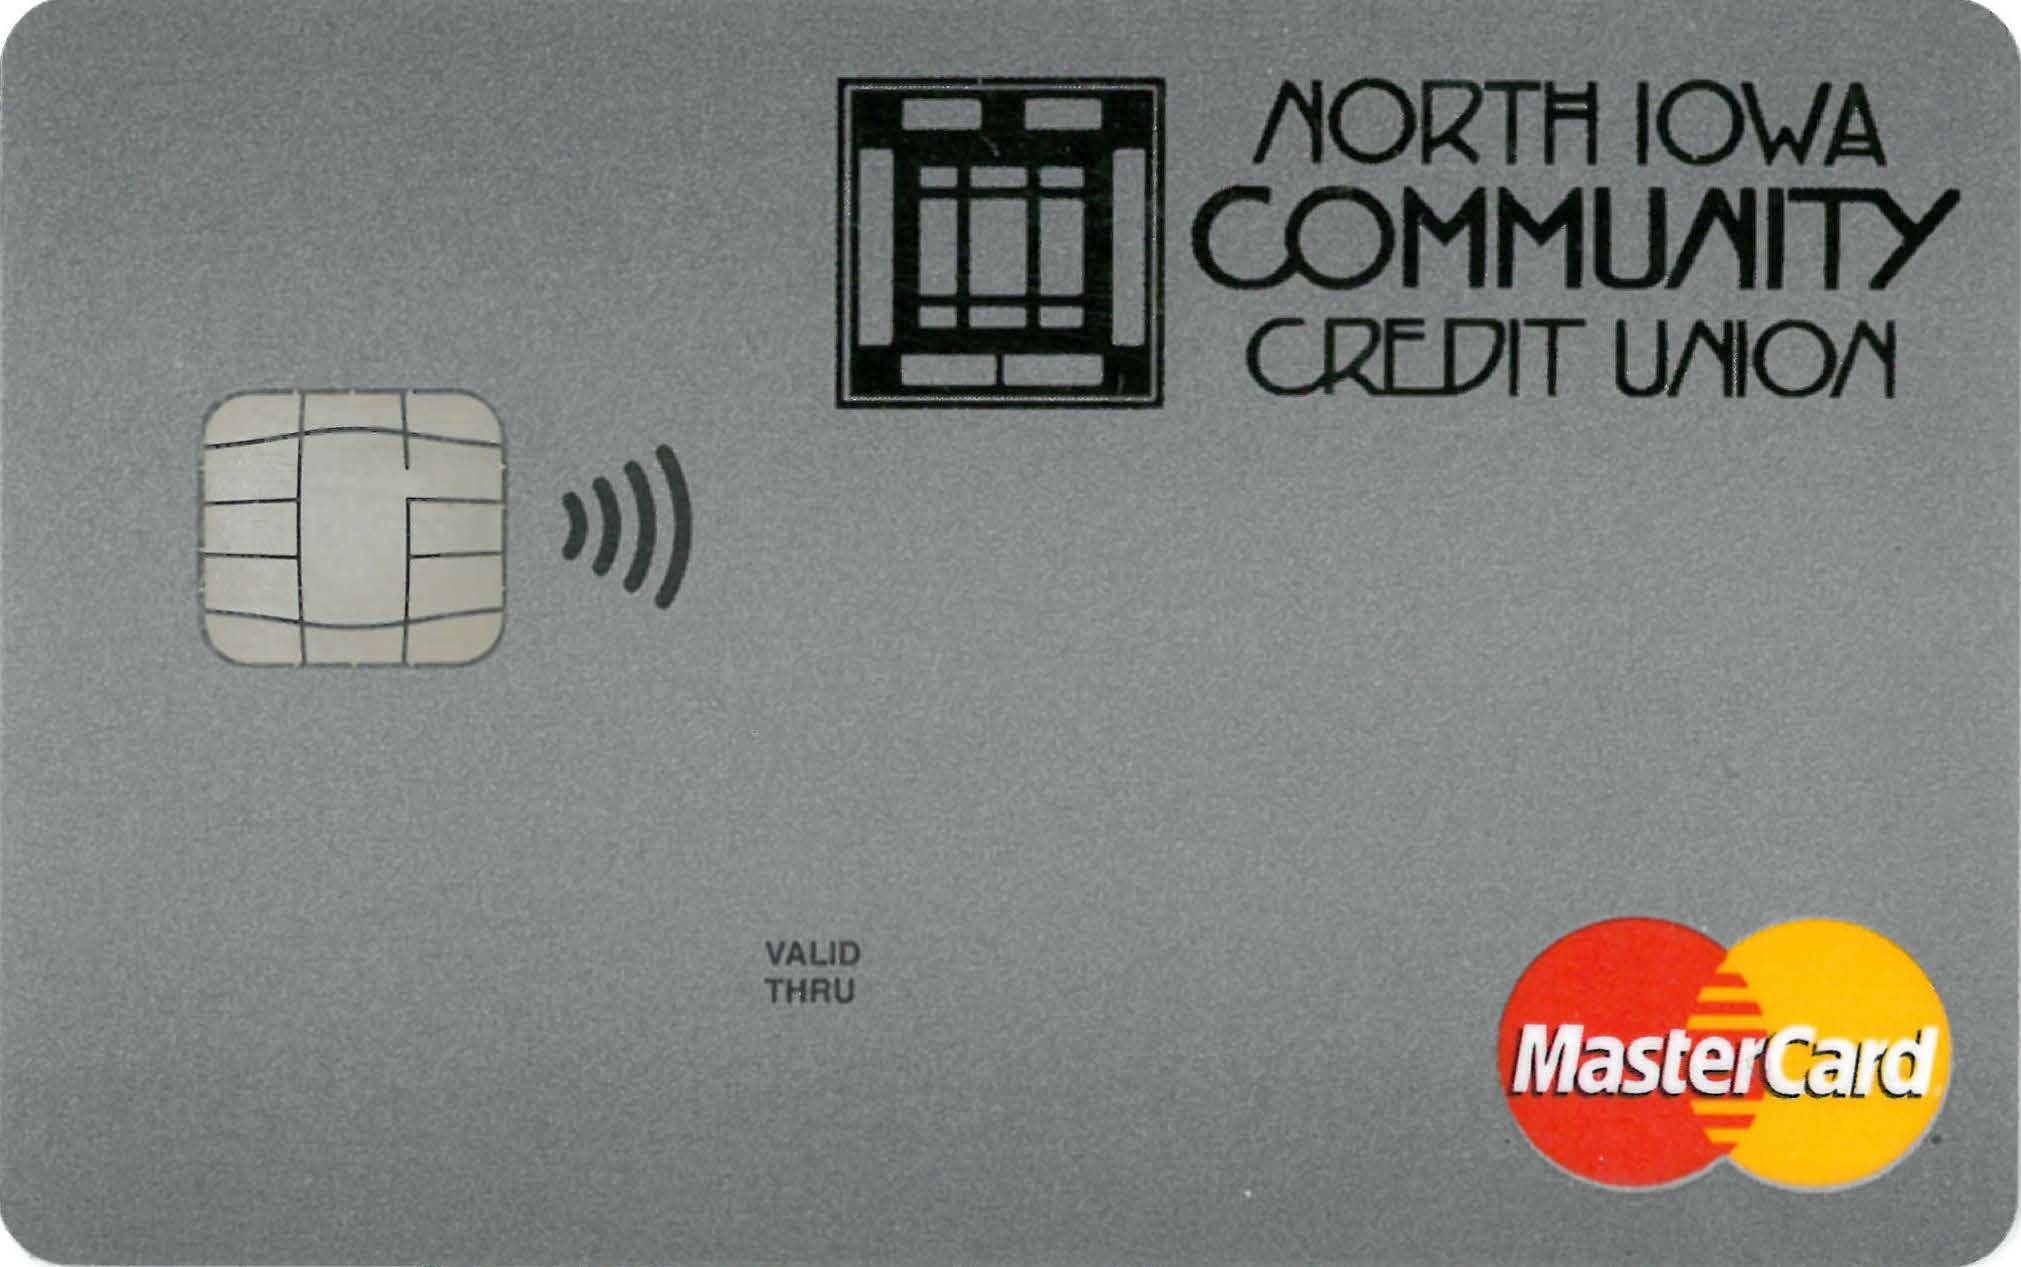 What Everyone Should Know About EMV Cards